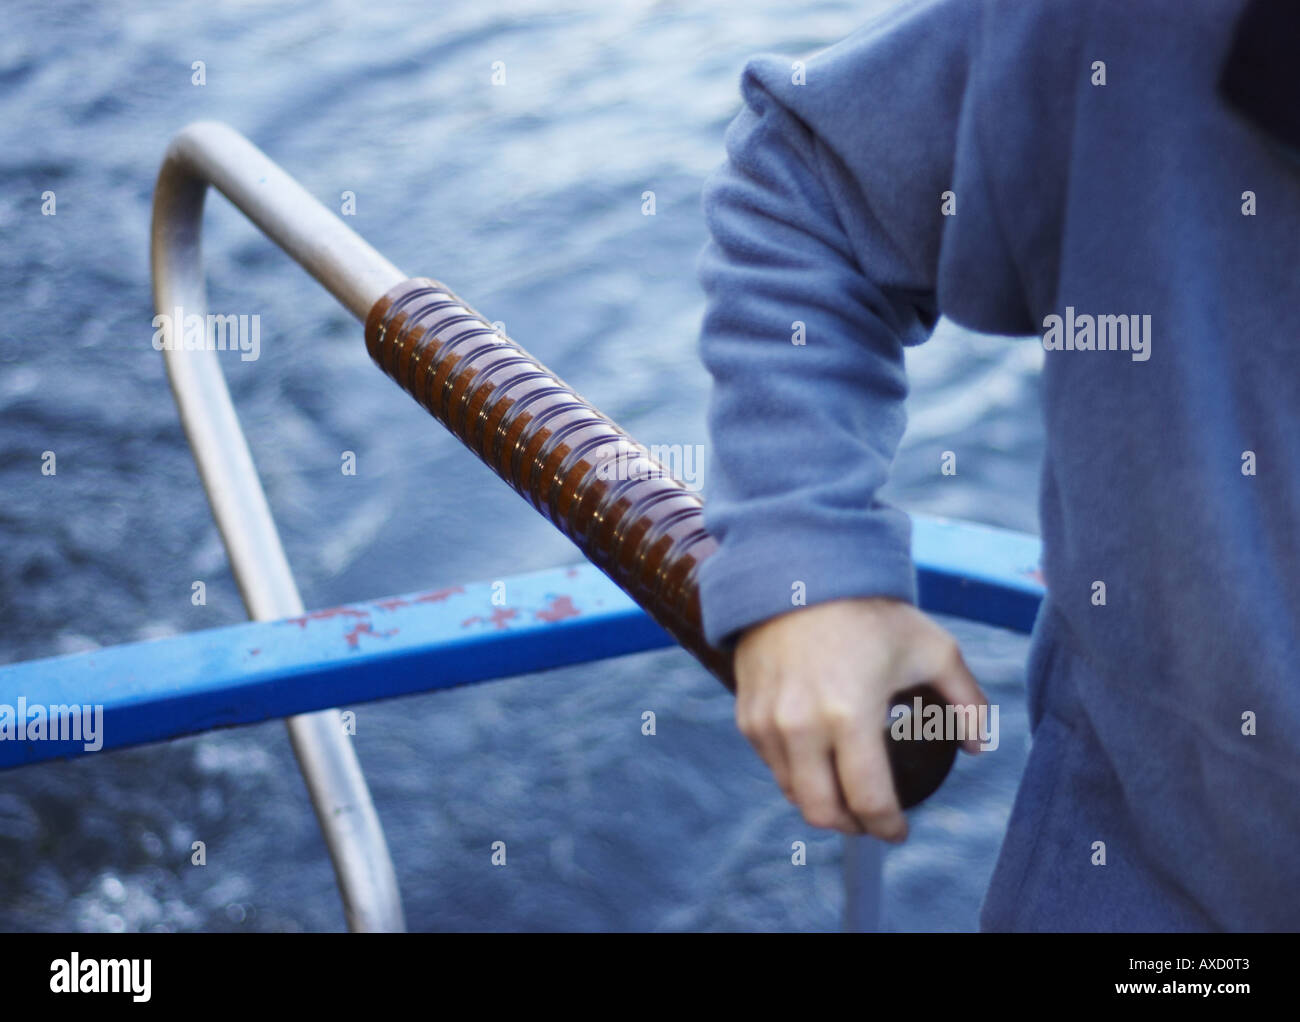 man steering canal boat with hand on the tiller Stock Photo